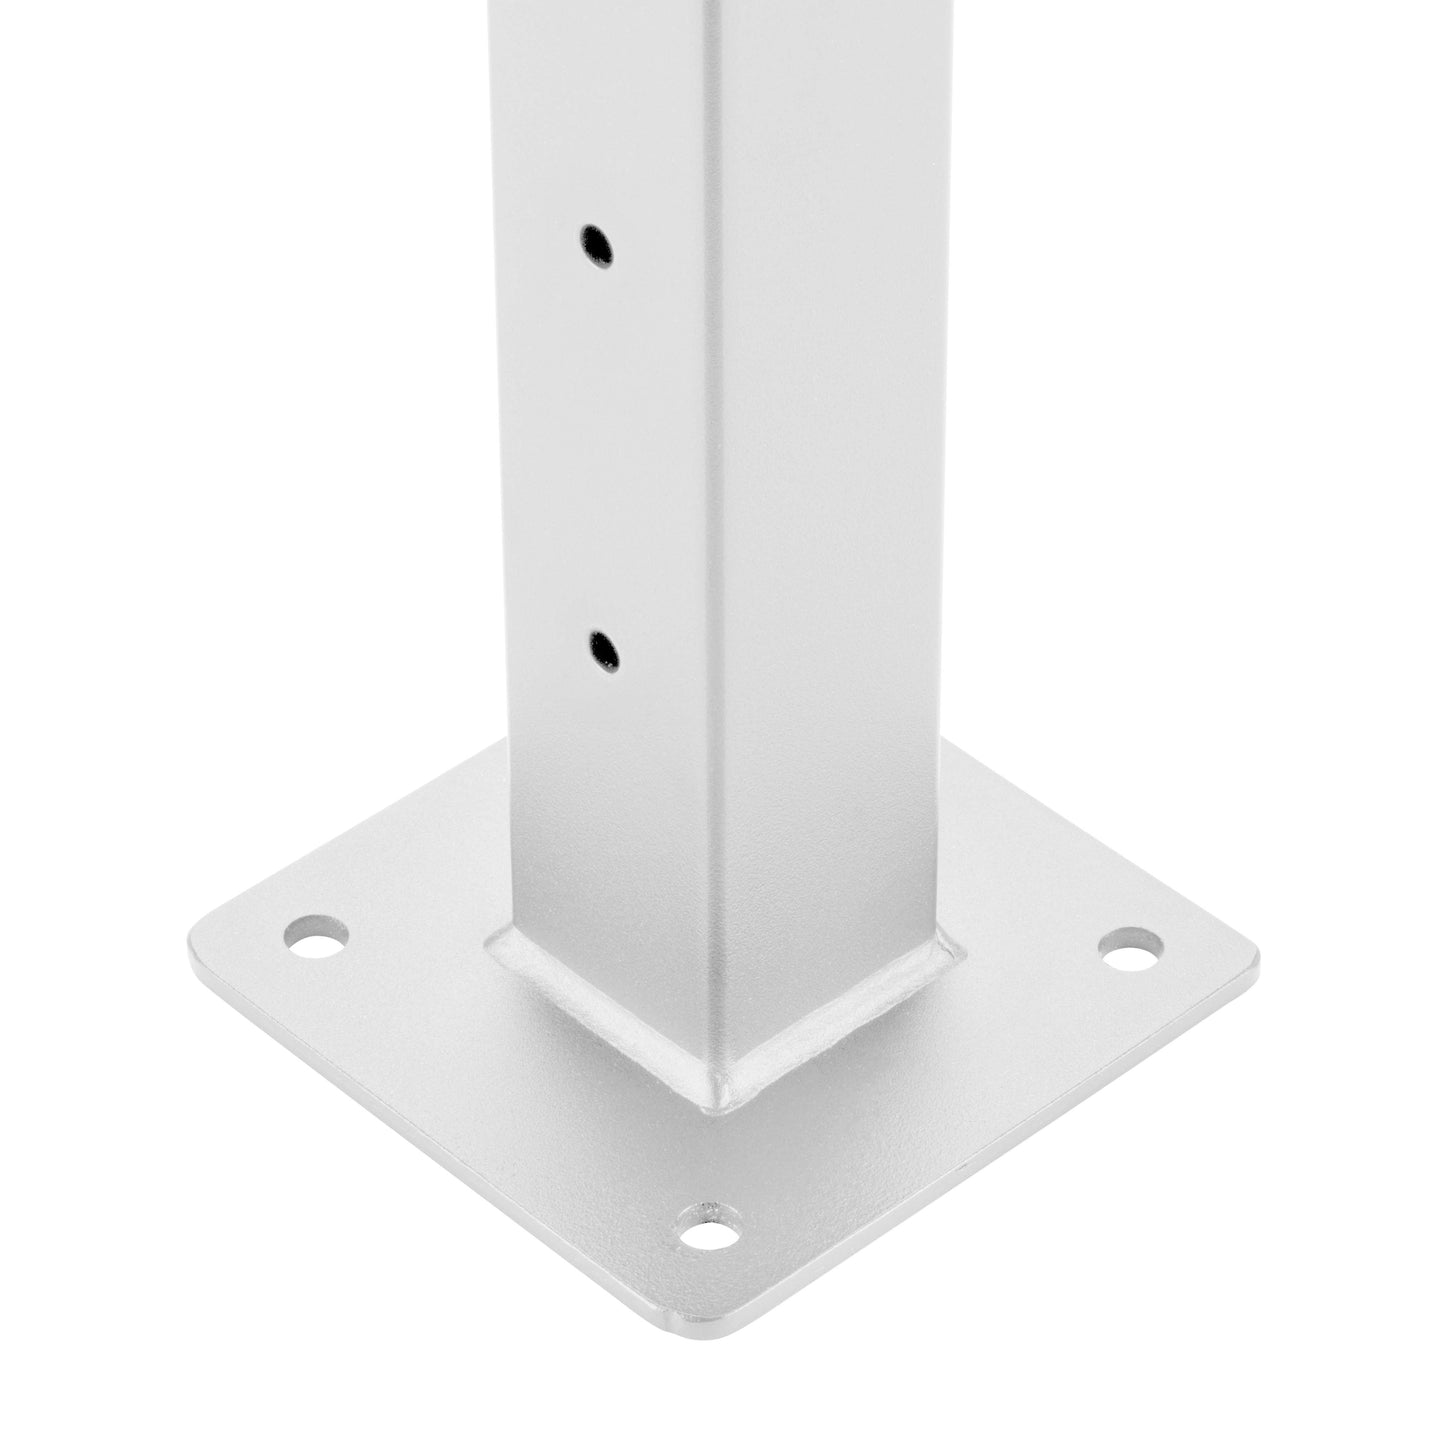 29 ft. x 42 in. White Deck Cable Railing, Base Mount , Stainless